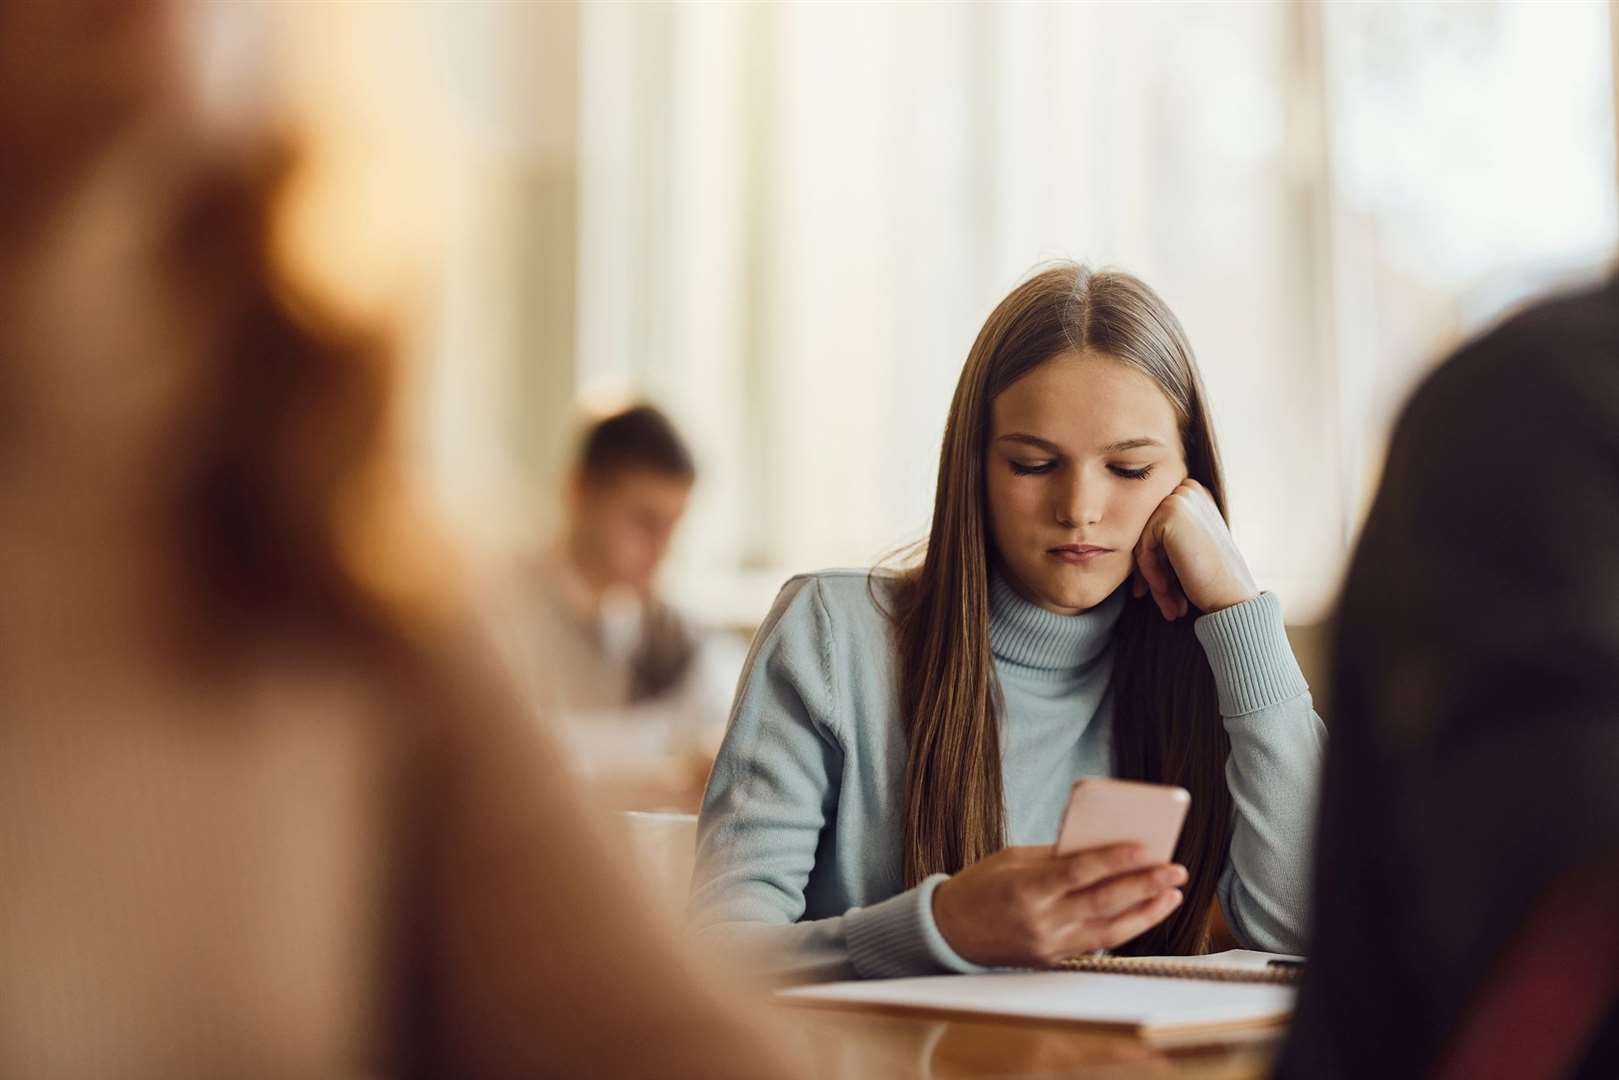 Over 2,100 young people in Suffolk had seen the ‘sharing of images or videos of other students of a sexual nature’. Stock image. Picture: iStock